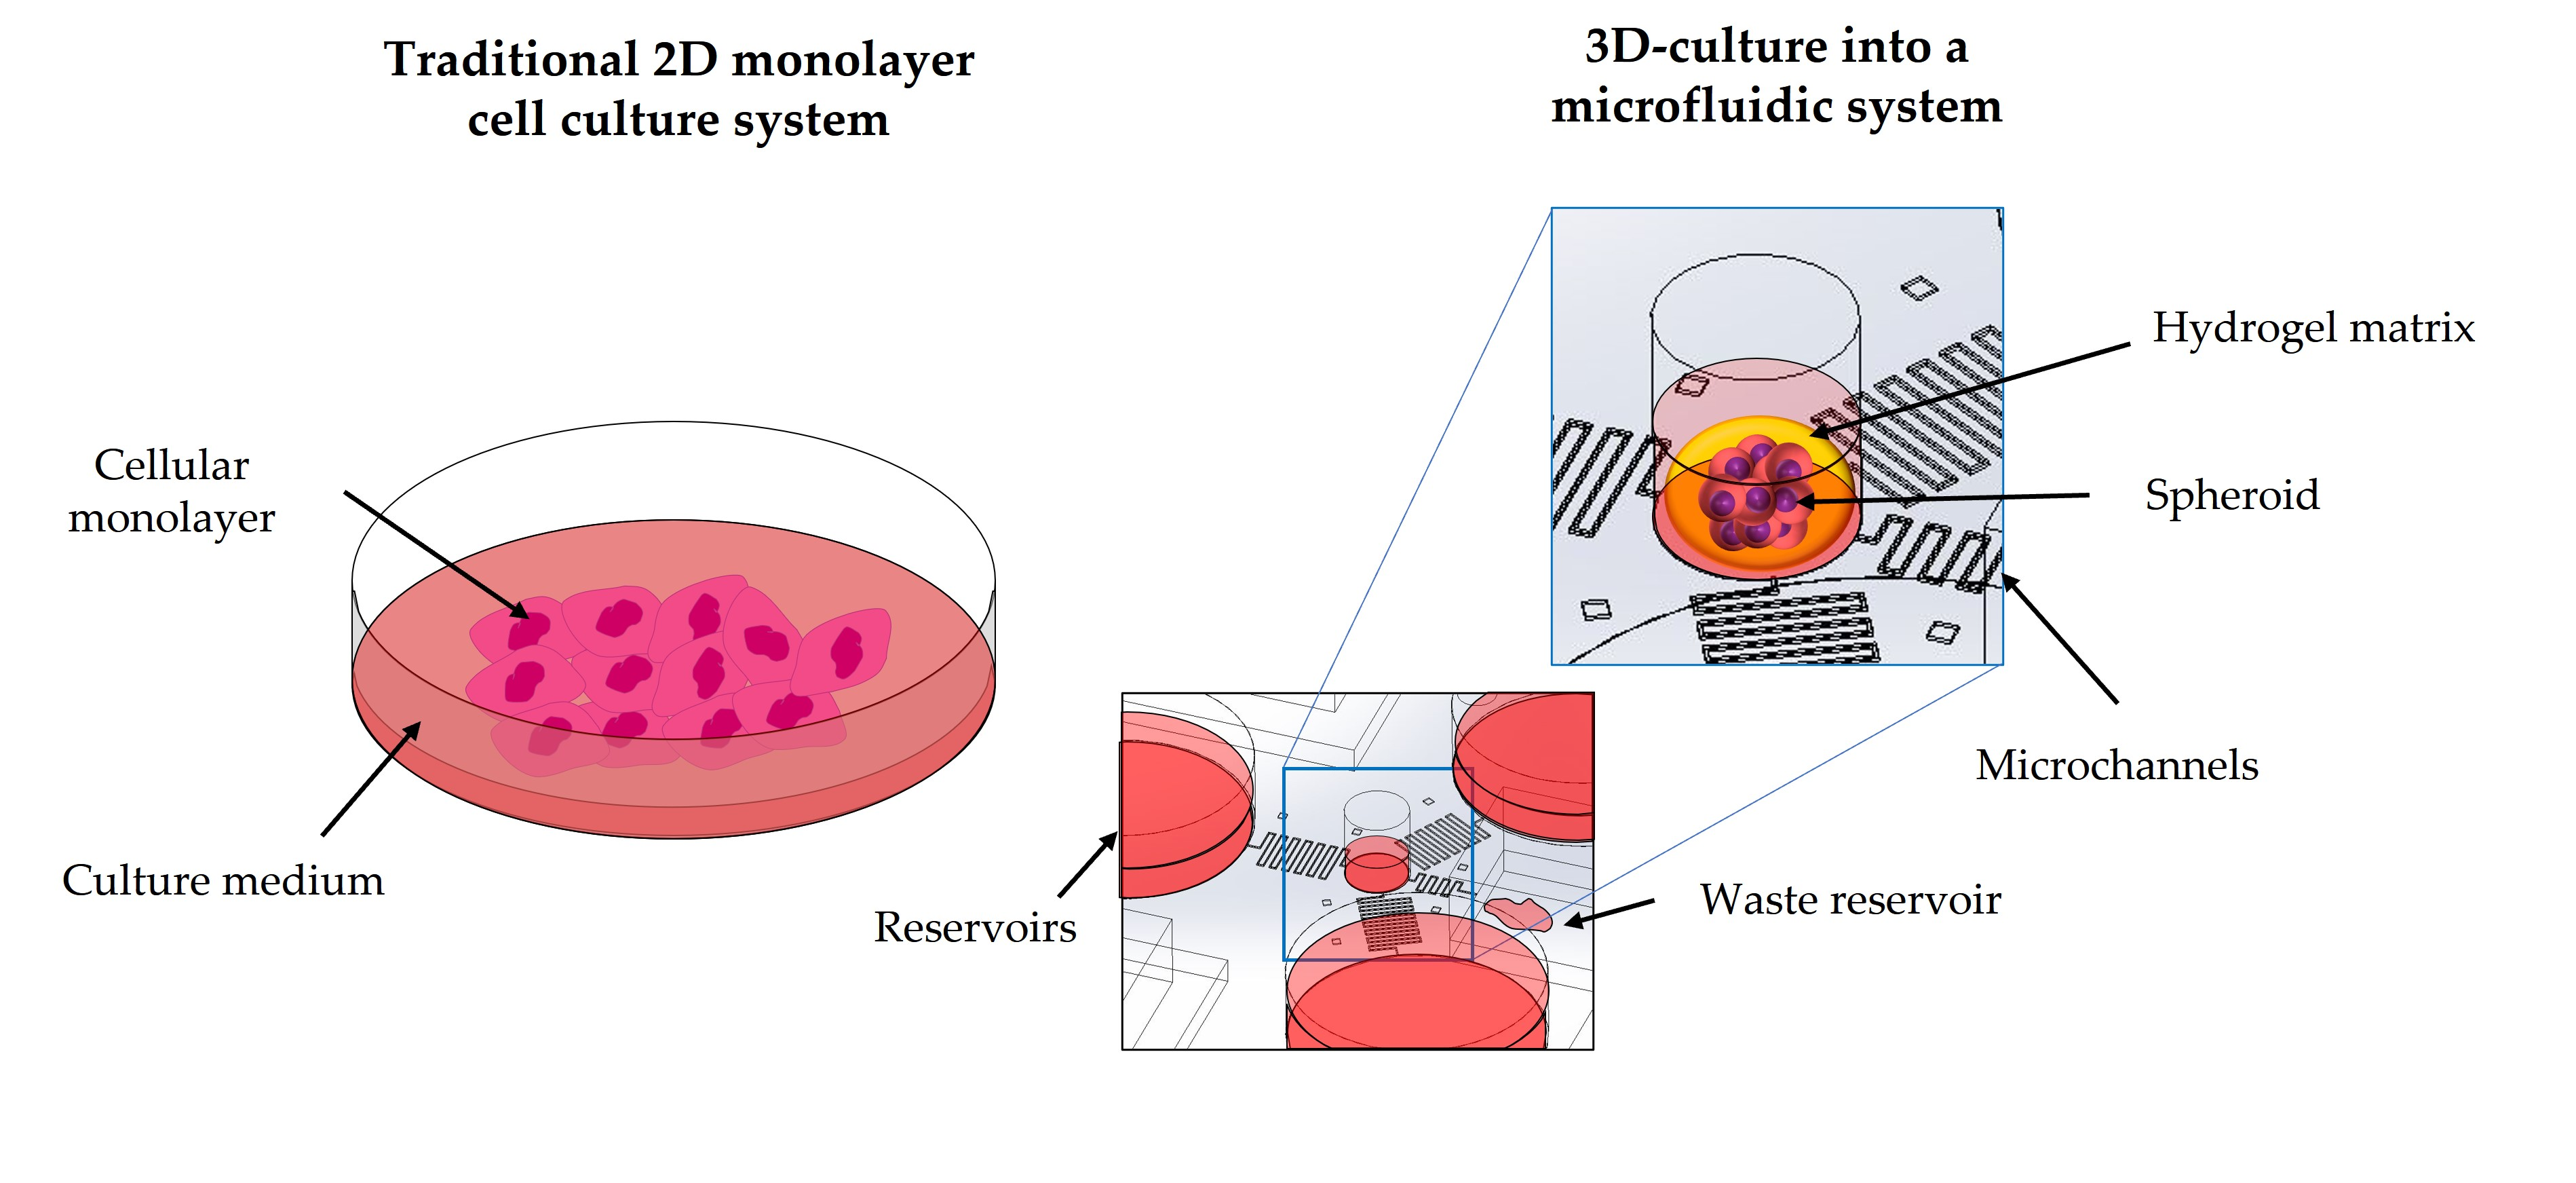 Cells | Free Full-Text | Microfluidics for 3D Cell and Tissue Cultures:  Microfabricative and Ethical Aspects Updates